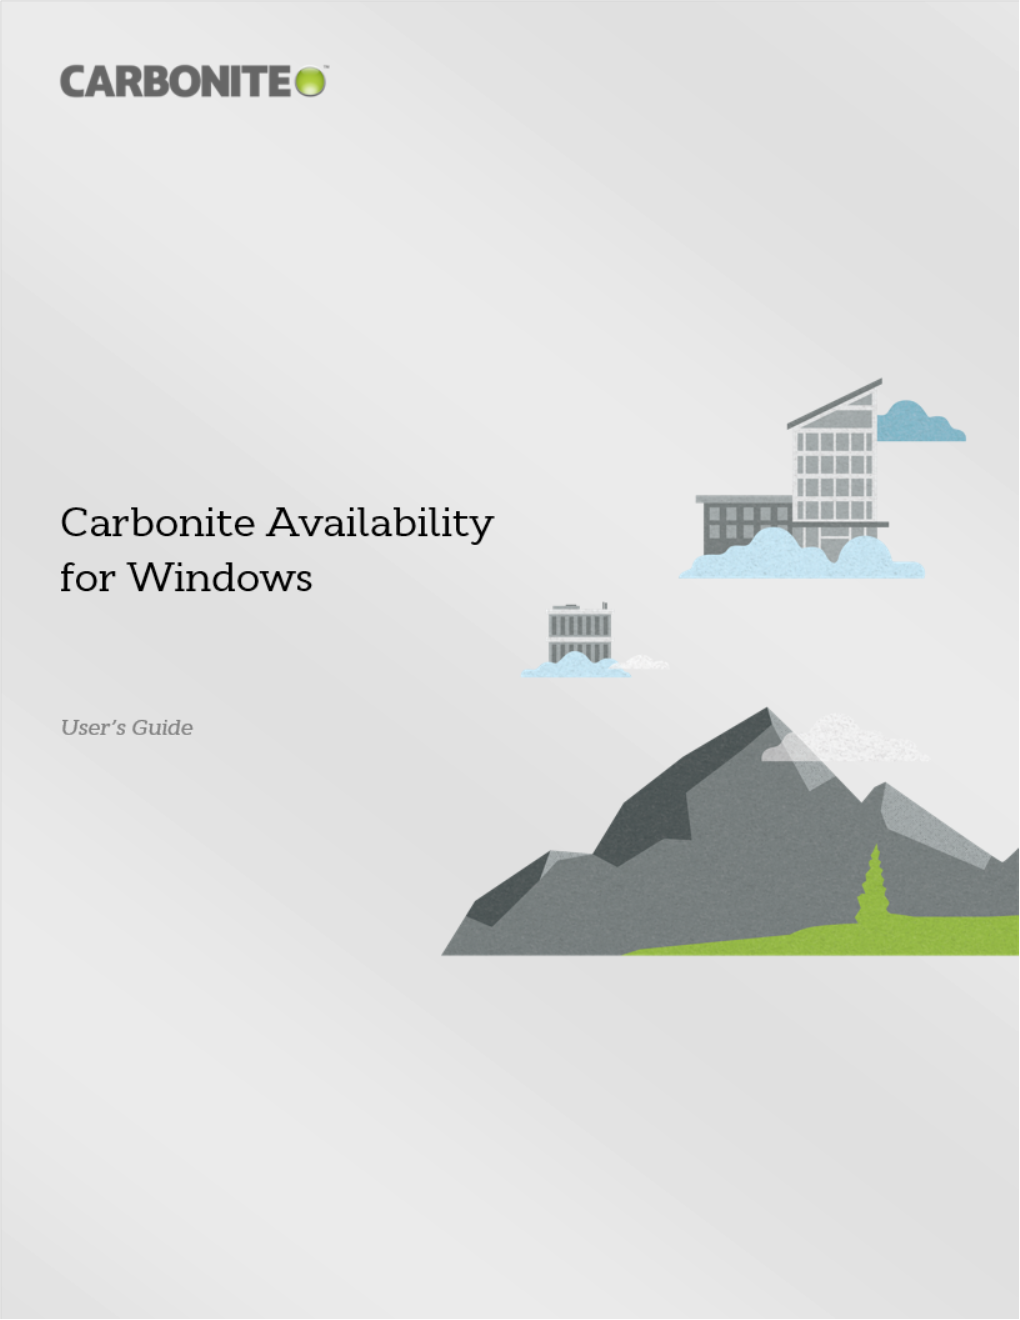 Carbonite Availability for Windows User's Guide Version 8.2.1, Wednesday, October 17, 2018 If You Need Technical Assistance, You Can Contact Customercare